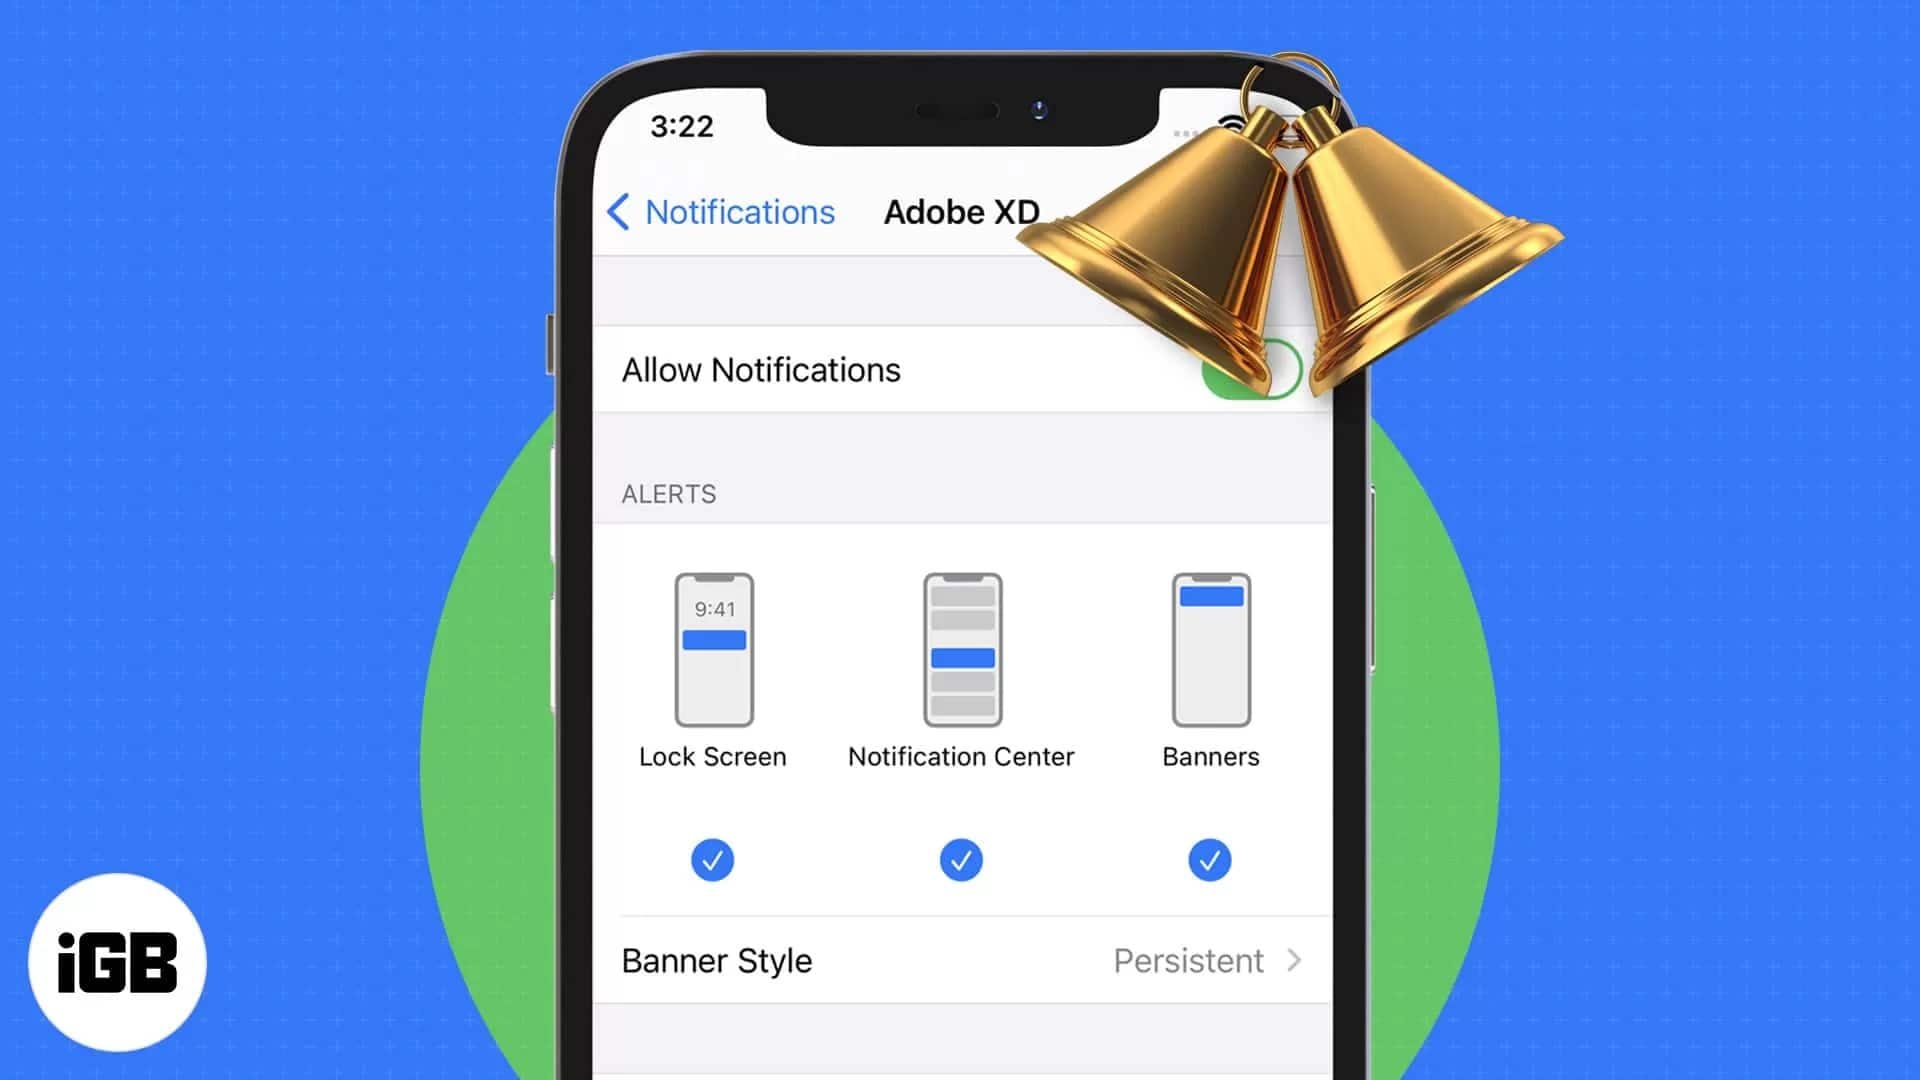 How to enable persistent notifications on iphone and ipad